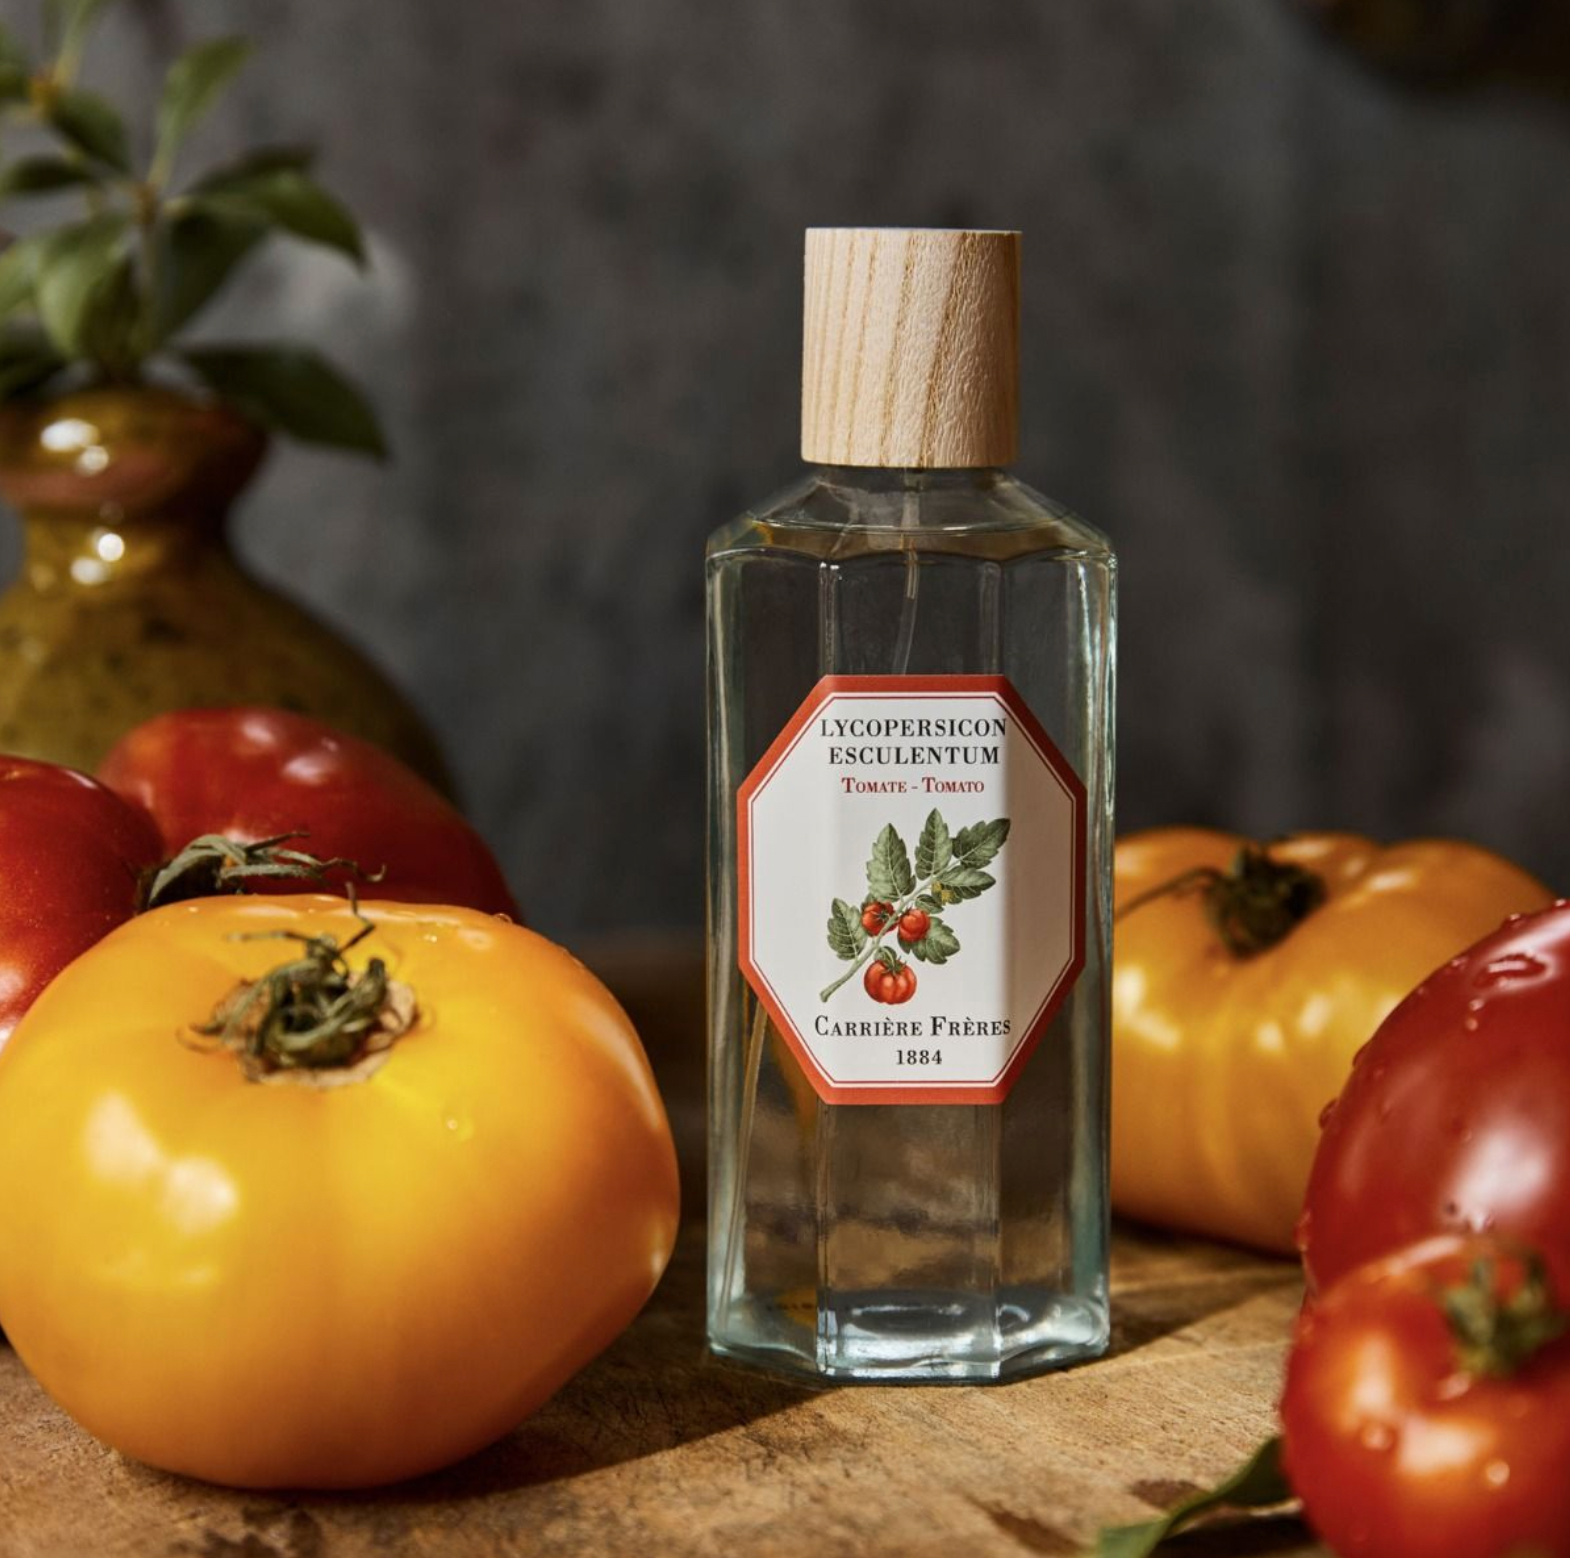 Carriere Freres Room Spray Tomato